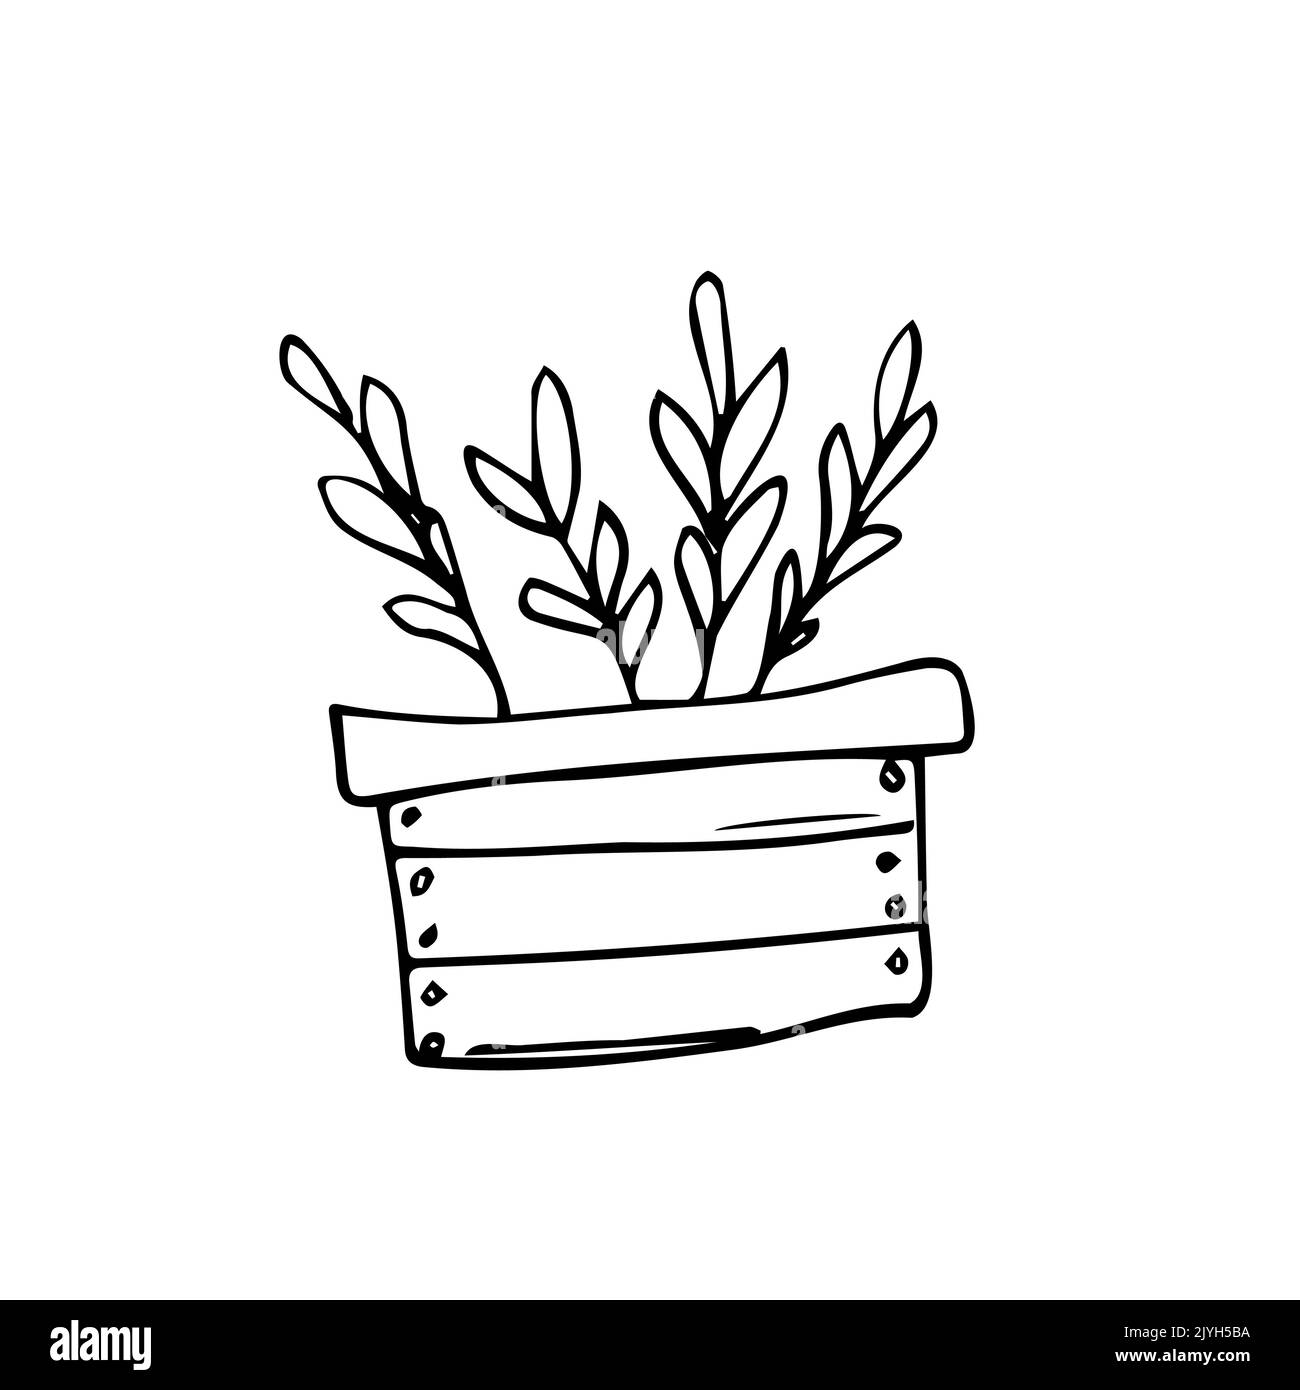 Wooden box with growing plants. Planting process. Home gardening, horticulture care for the environment concept. Vector illustration in cartoon style. Stock Vector